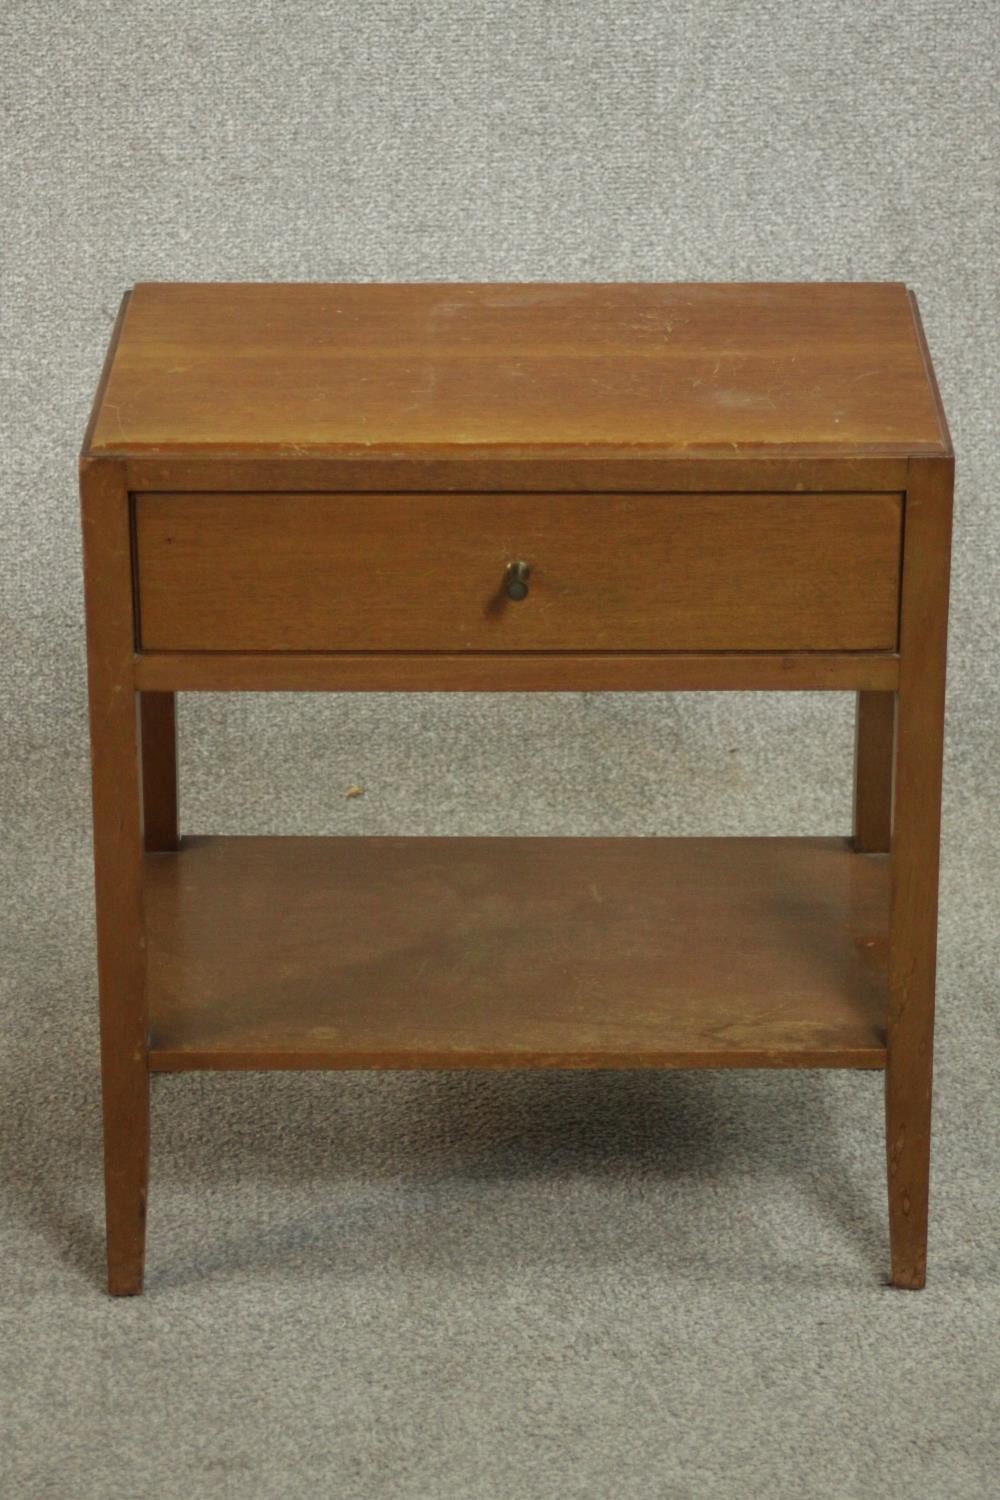 A mid 20th century Heal's style oak bedside table, with a single drawer over an undertier on